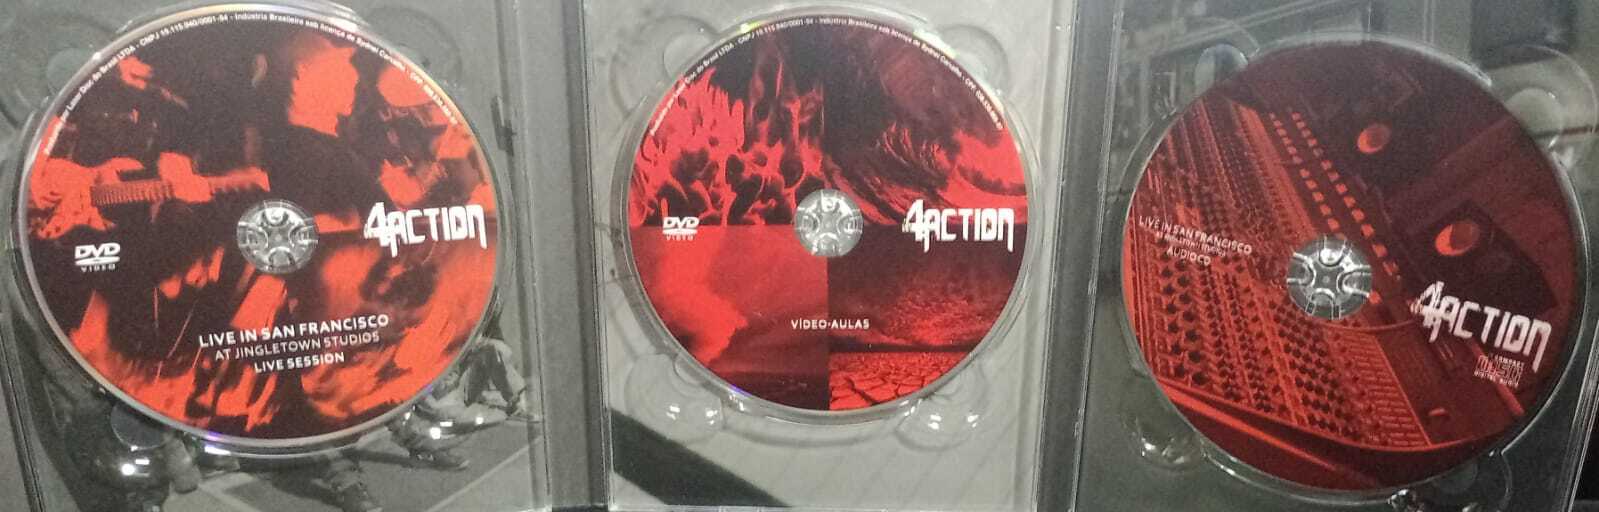 DVD - 4Action - Live In San Francisco (Box Triplo)